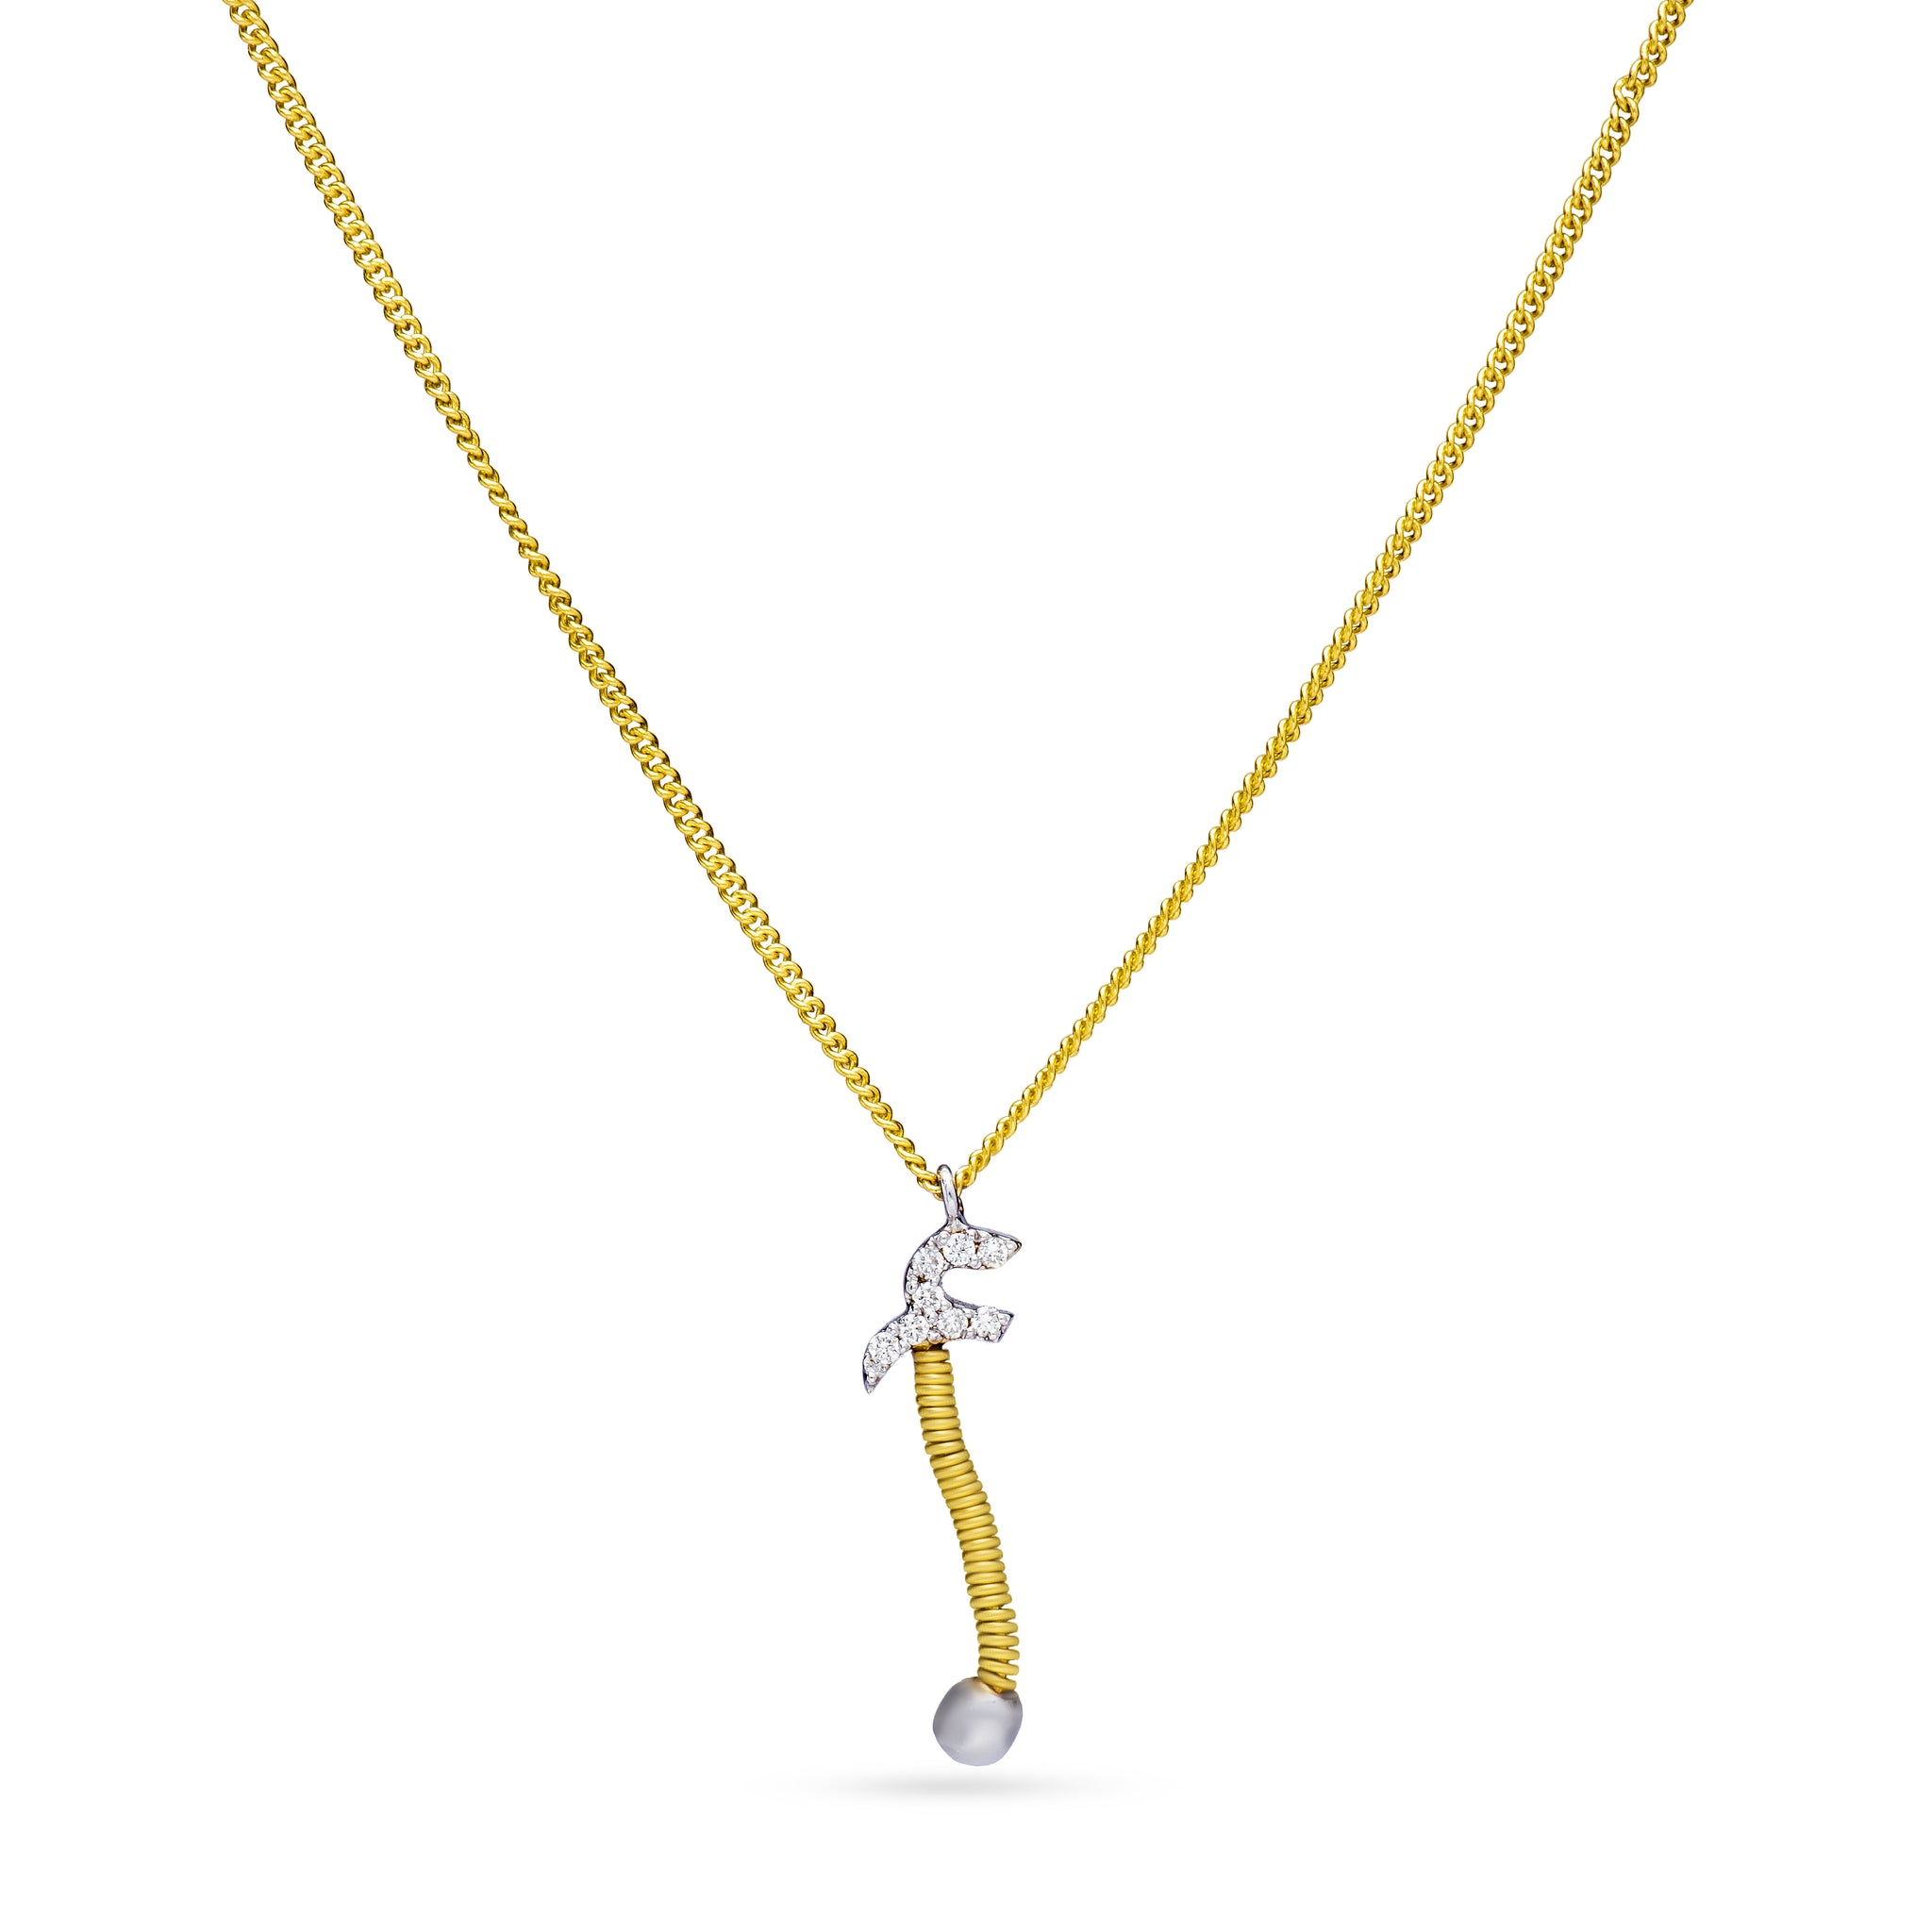 Letter Alef oustanding diamond necklace in Rose 18 K Gold - SIR1699